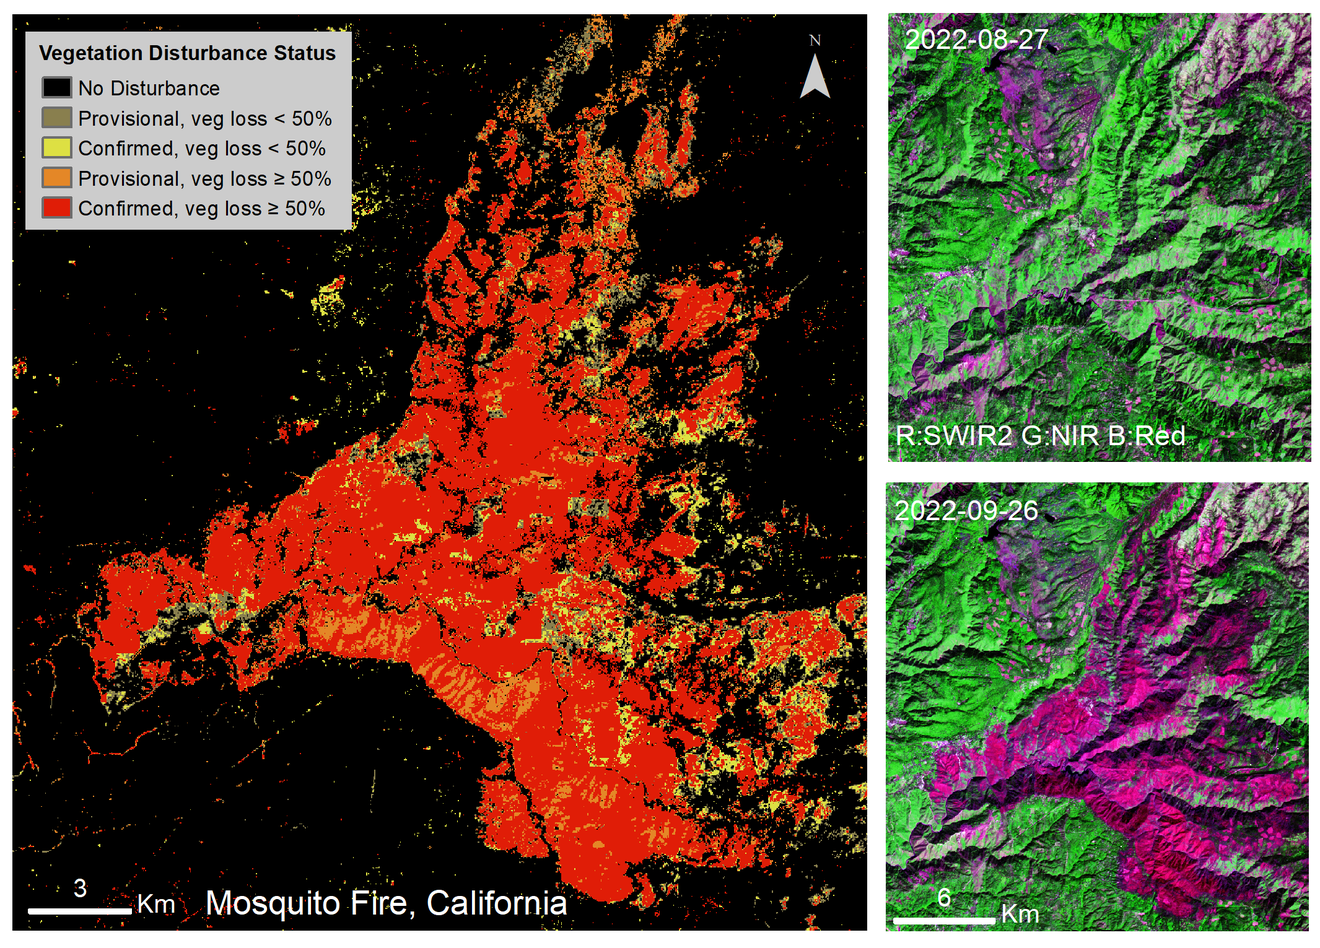 Vegetation disturbance map of the Mosquito Fire in California. A donkey-head-shapped area of severe (>50%) vegetation loss is shown. Before (Aug. 27, 2022) and after (Sept. 26, 2022) images are shown on the image right.